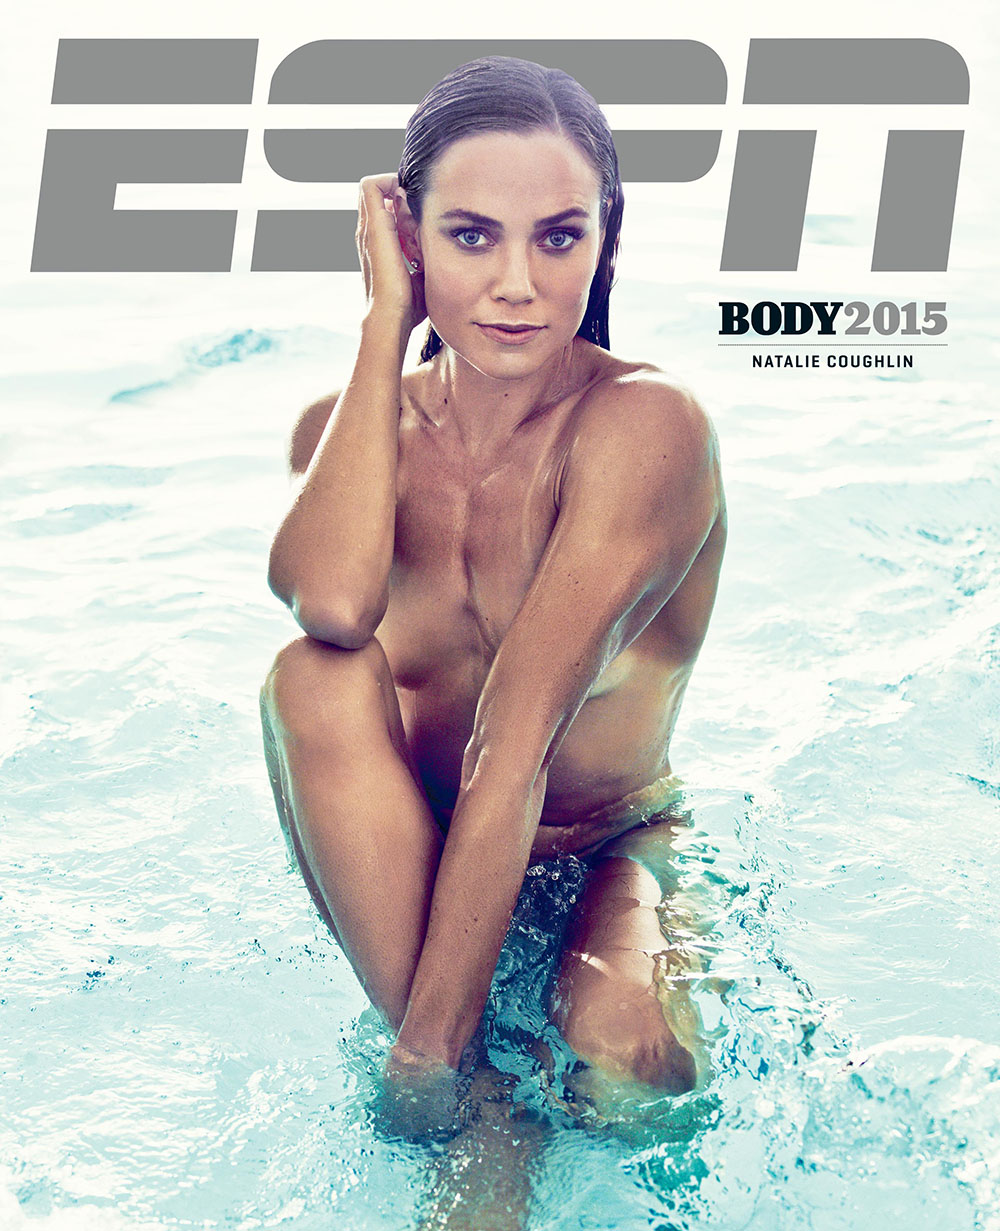 Photography News - Stunning sporty nudes by ESPN Natalie Coughlin photographed by Williams + Hirakawa